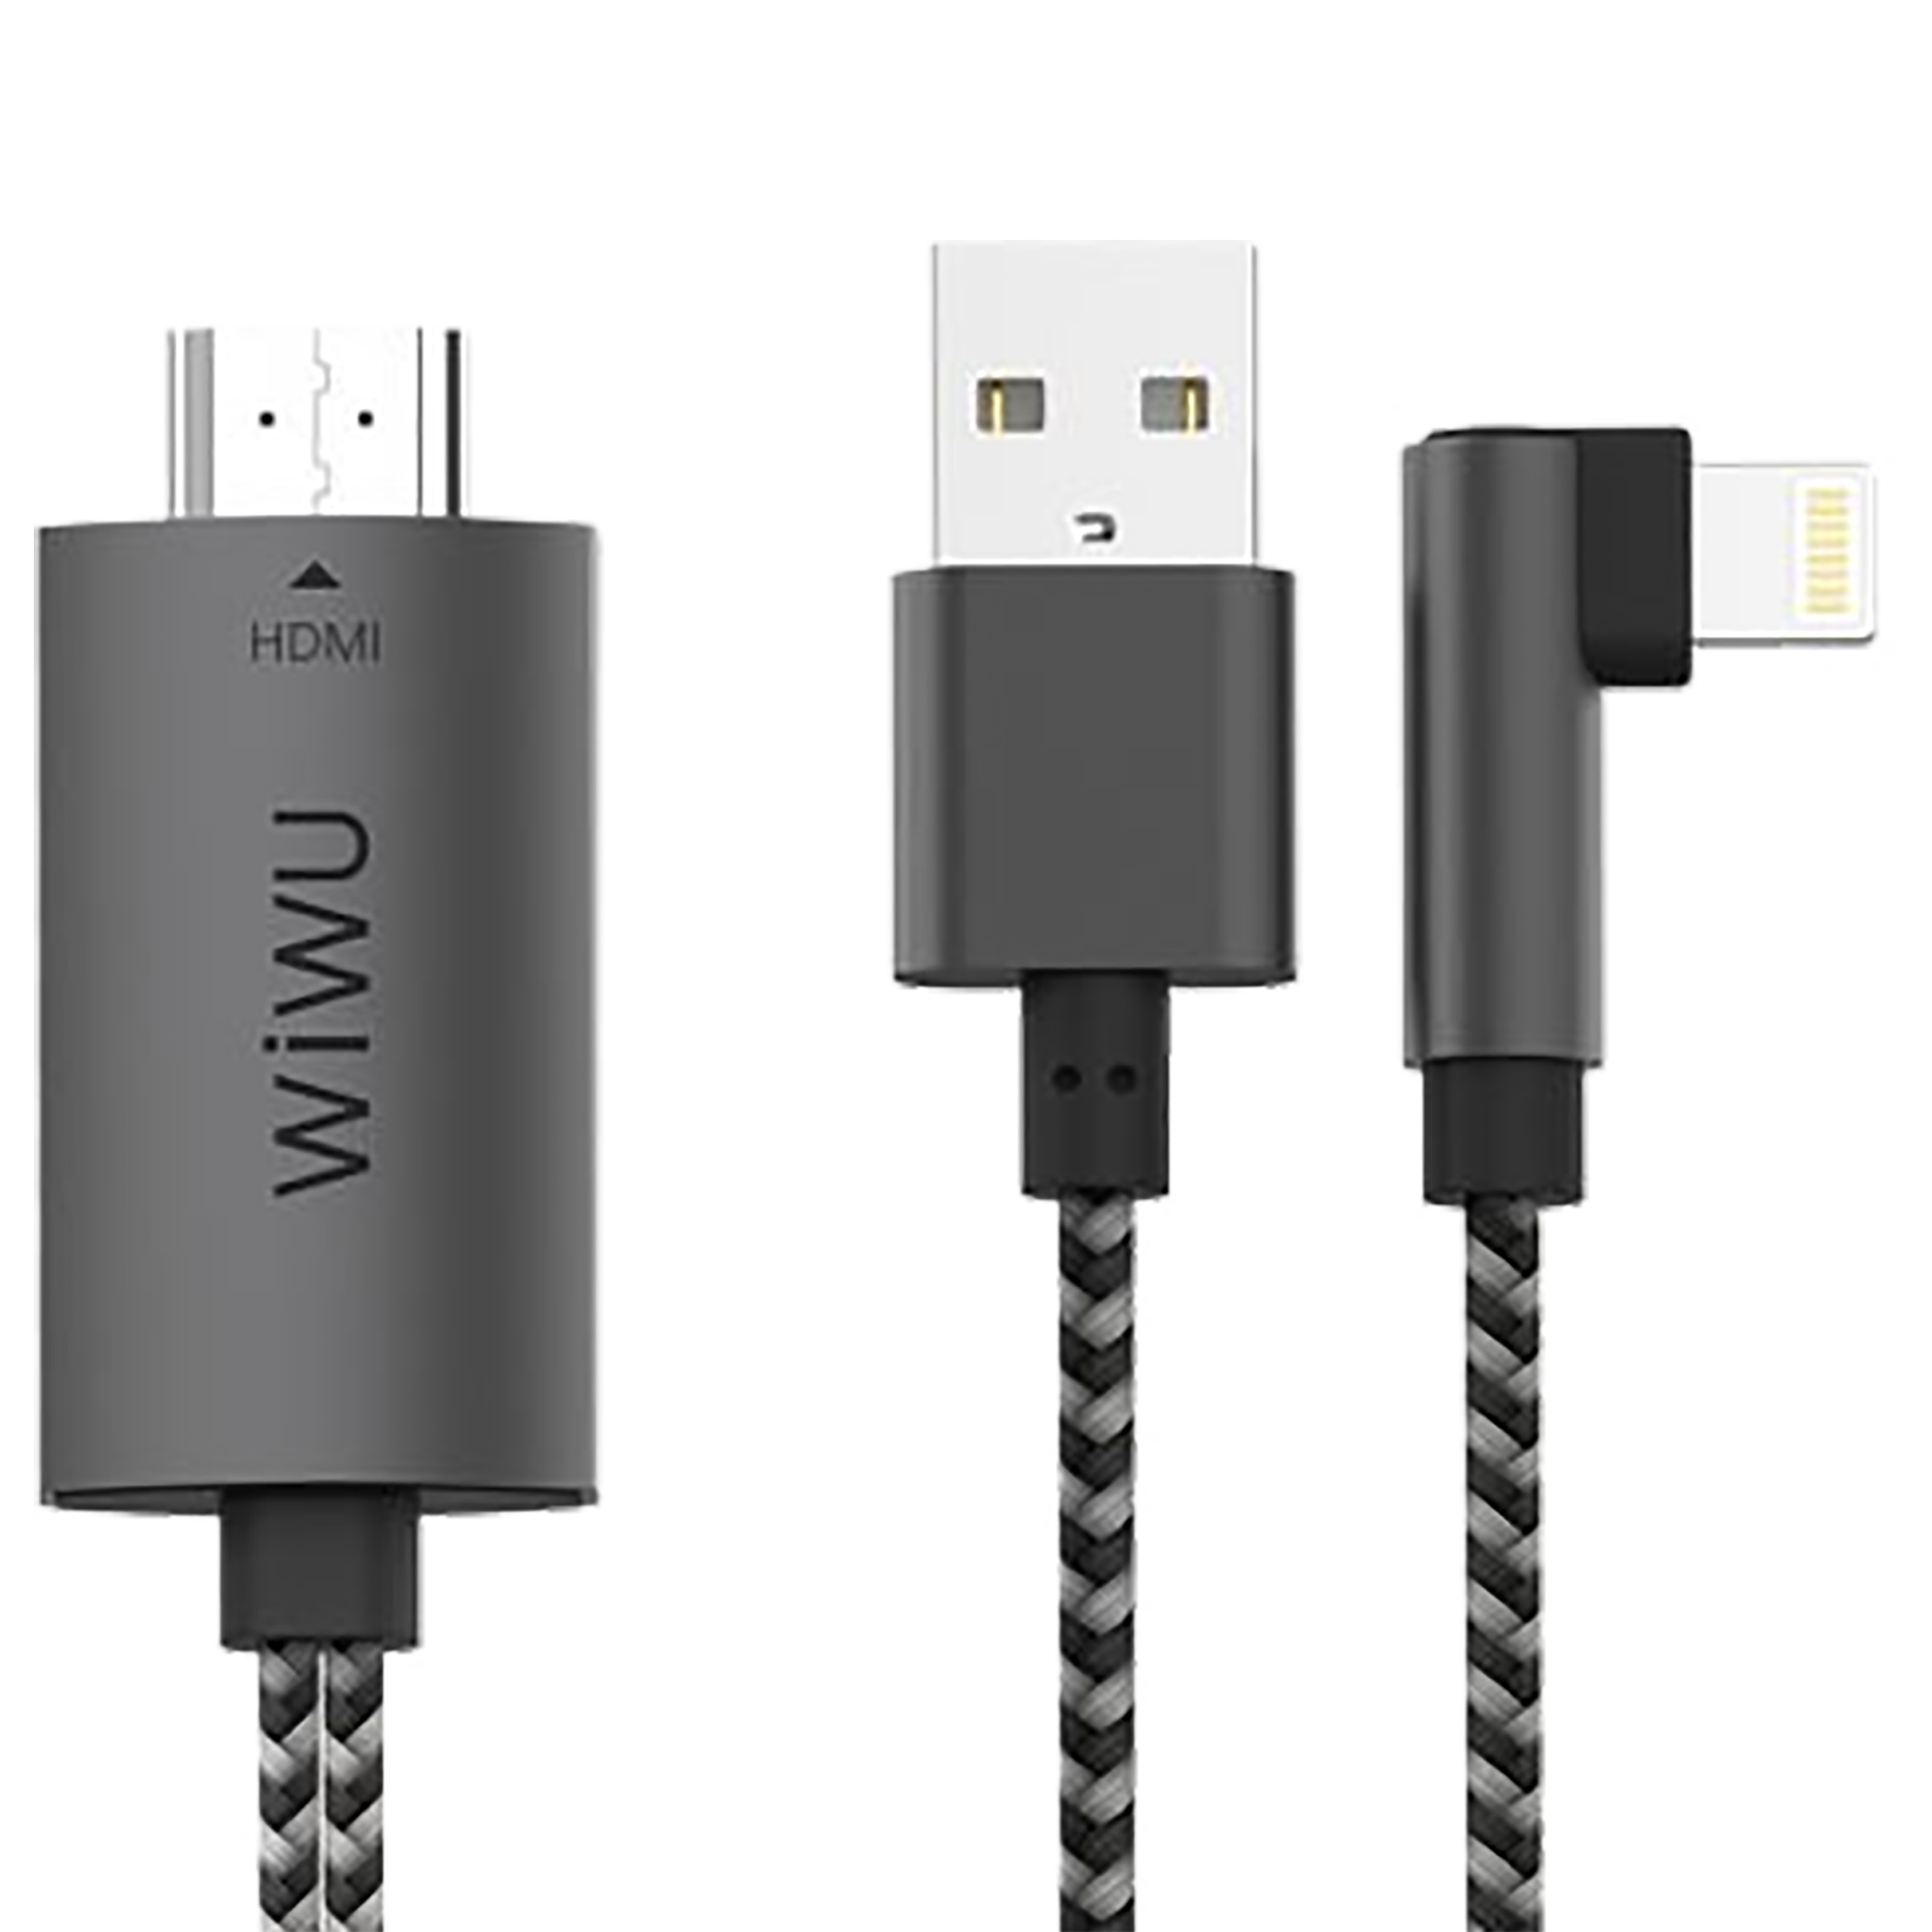 WiWU X7 2 Meter HDMI (Type-A) to Lightning/USB 2.0 (Type-A) Video Display Cable (Eco-Friendly, WU3473, Black)